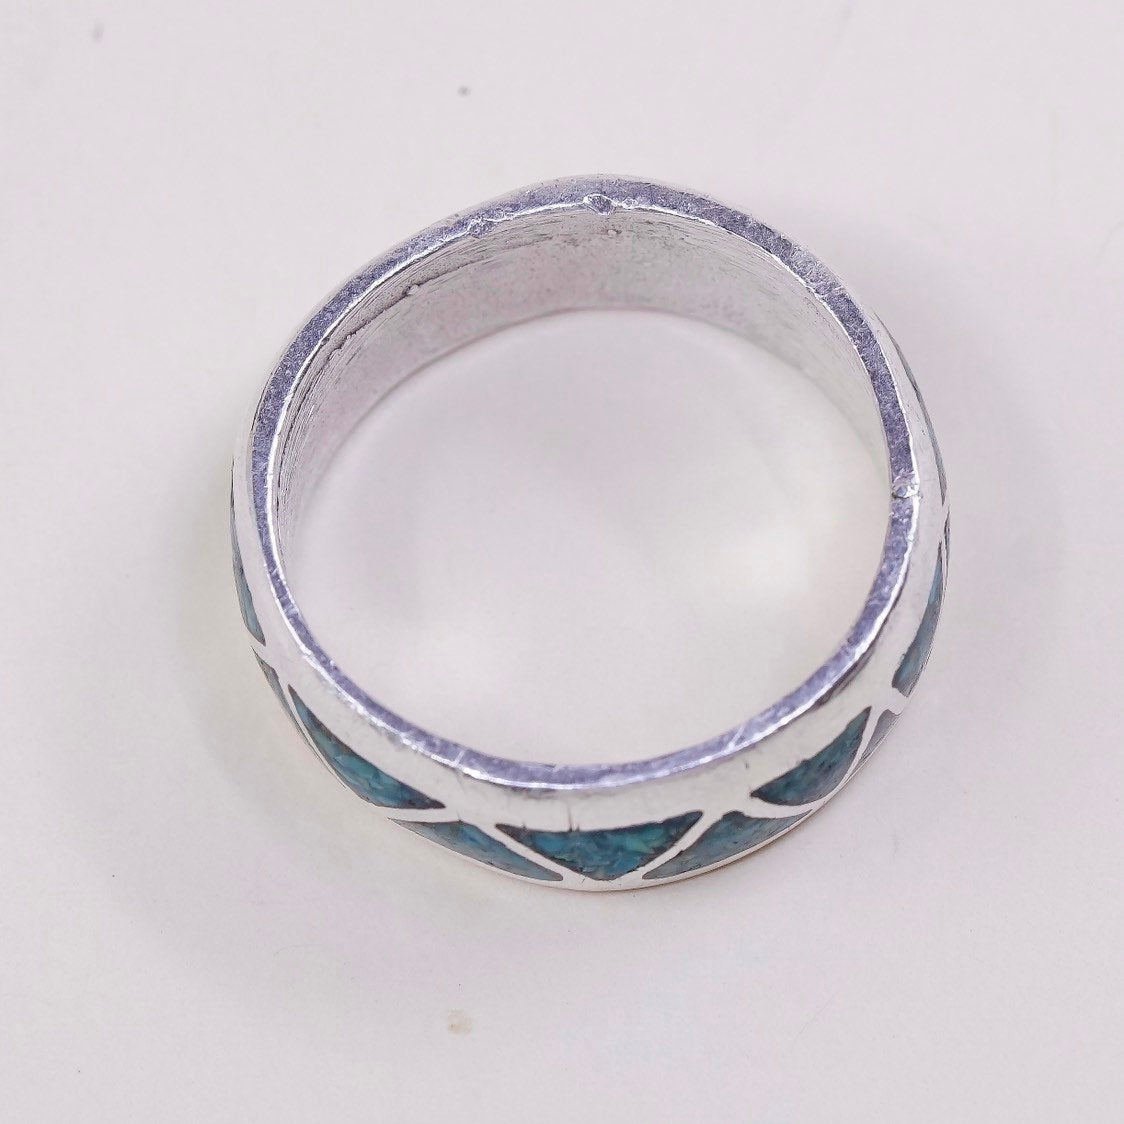 sz 11, Sterling silver handmade ring, 925 band w/ turquoise inlay, Zuni